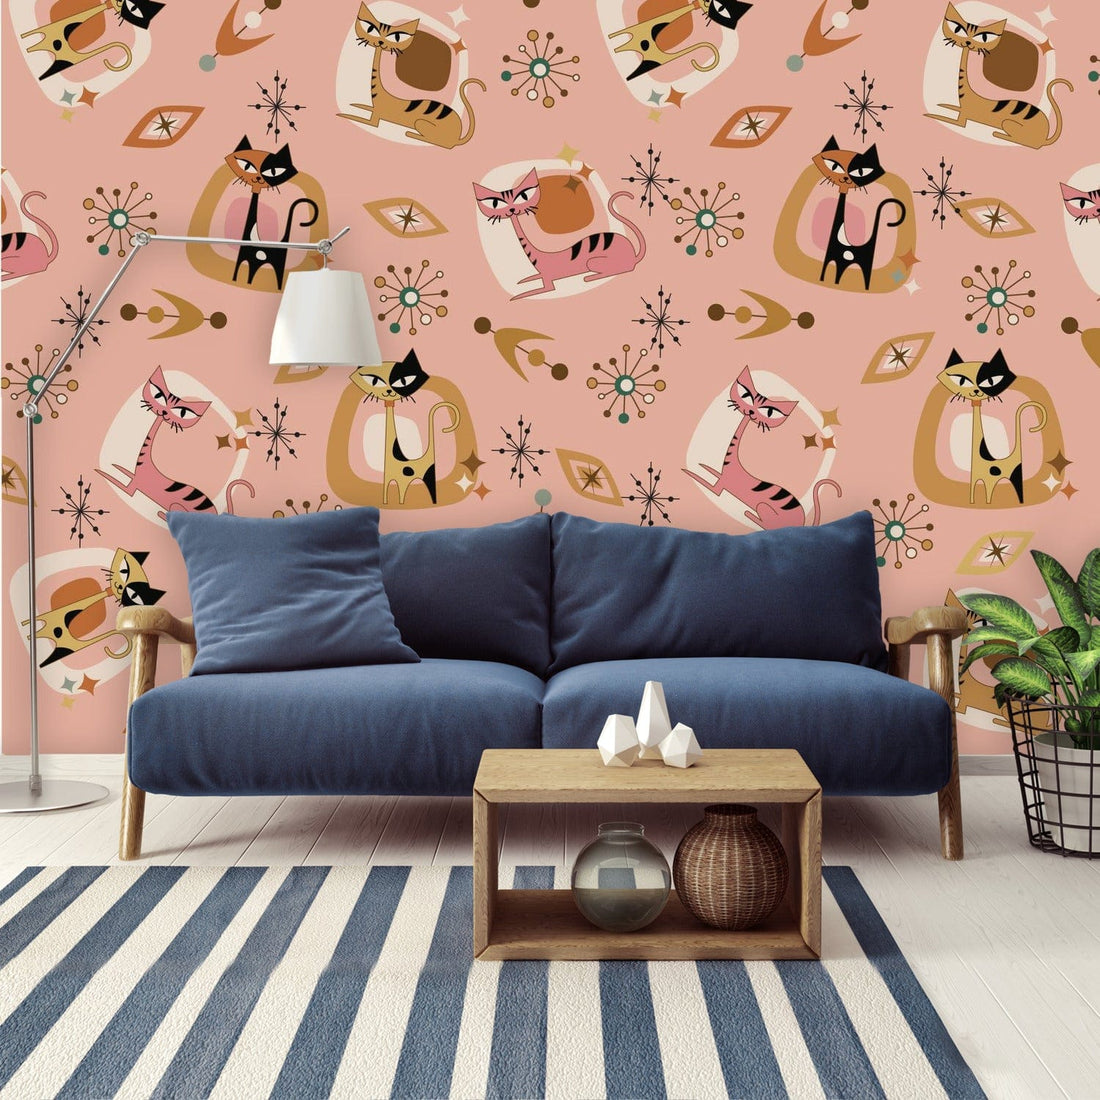 Atomic Kitschy Cat, Cat Lover, Mid Century Modern, Peel And Stick Wall Murals Wallpaper H96 x W140